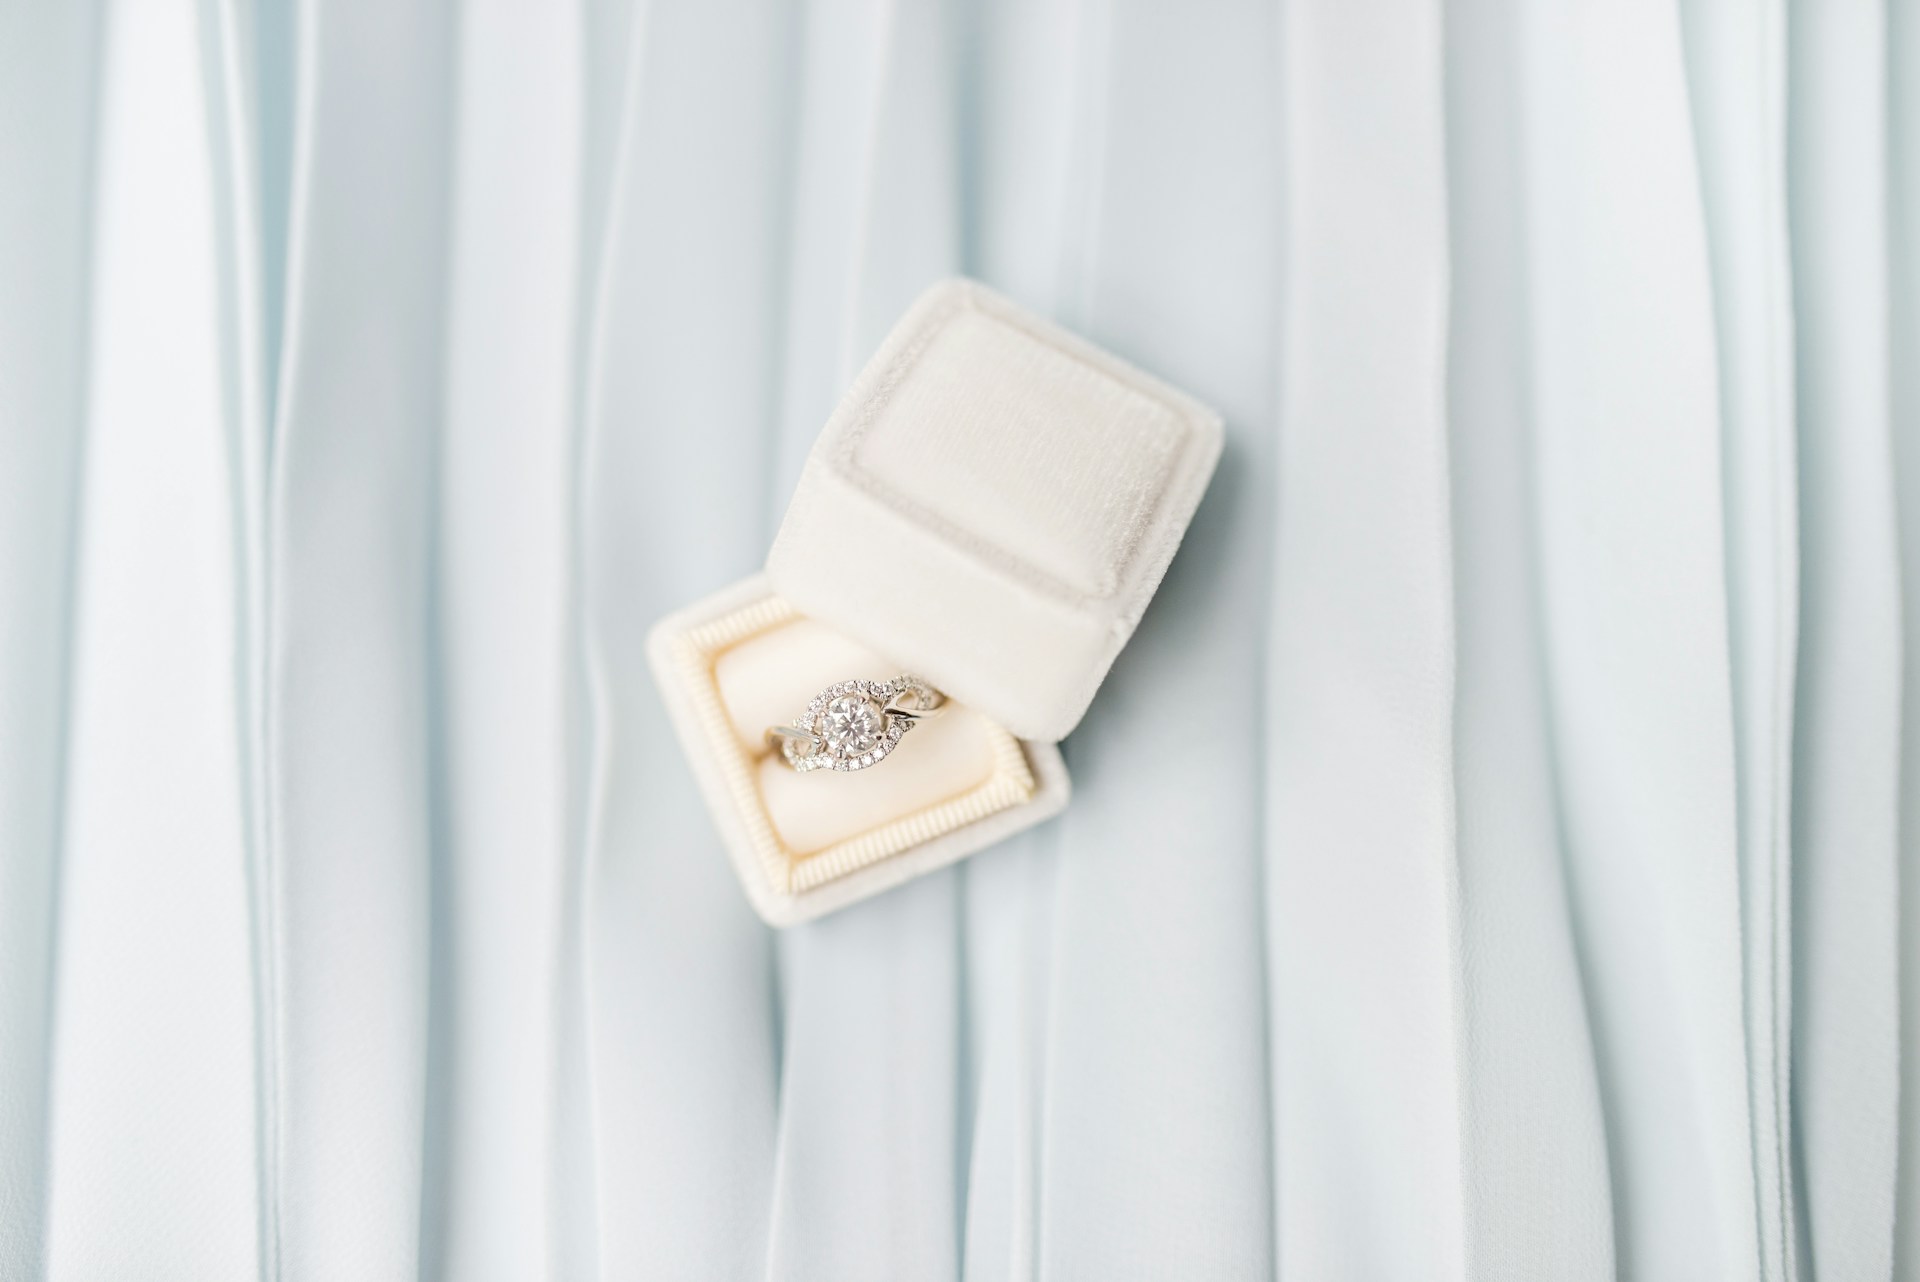 A diamond halo engagement ring in a white box on a white pleated fabric.